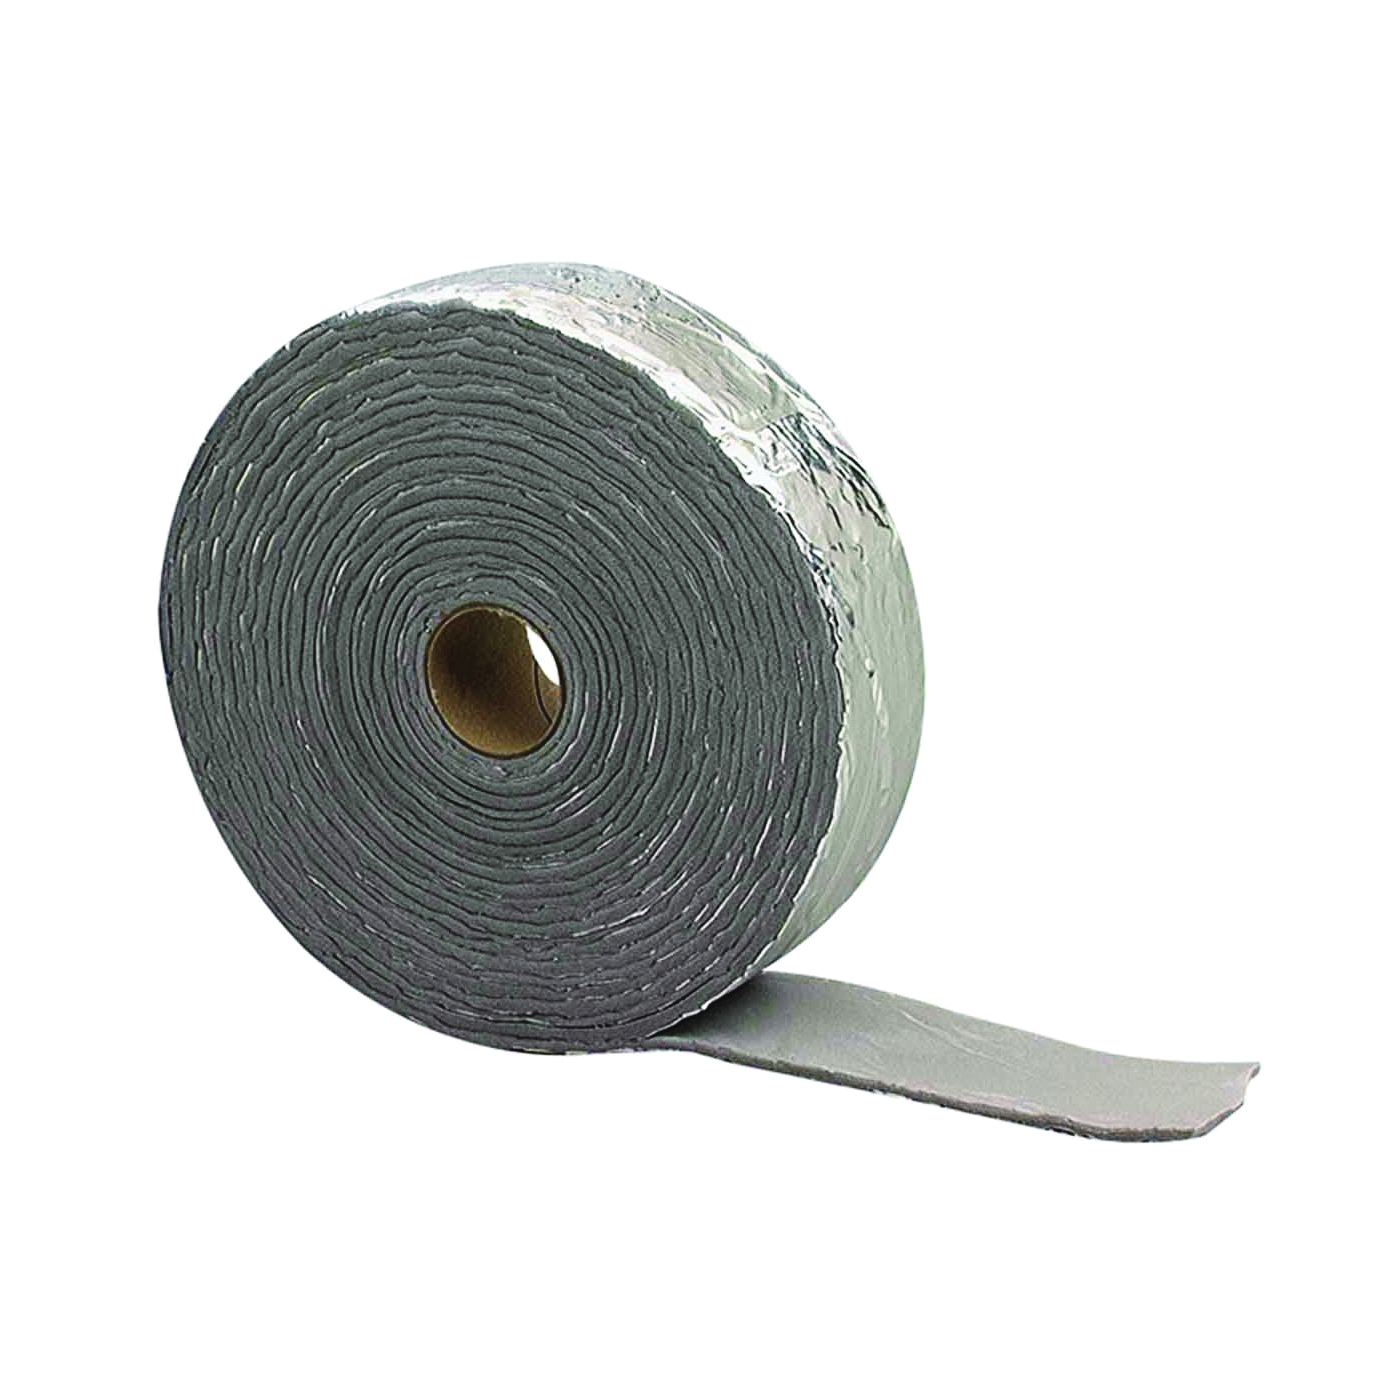 02394 Pipe Insulation Wrap, 30 ft L, 1/8 in Thick, PVC, Black/Silver